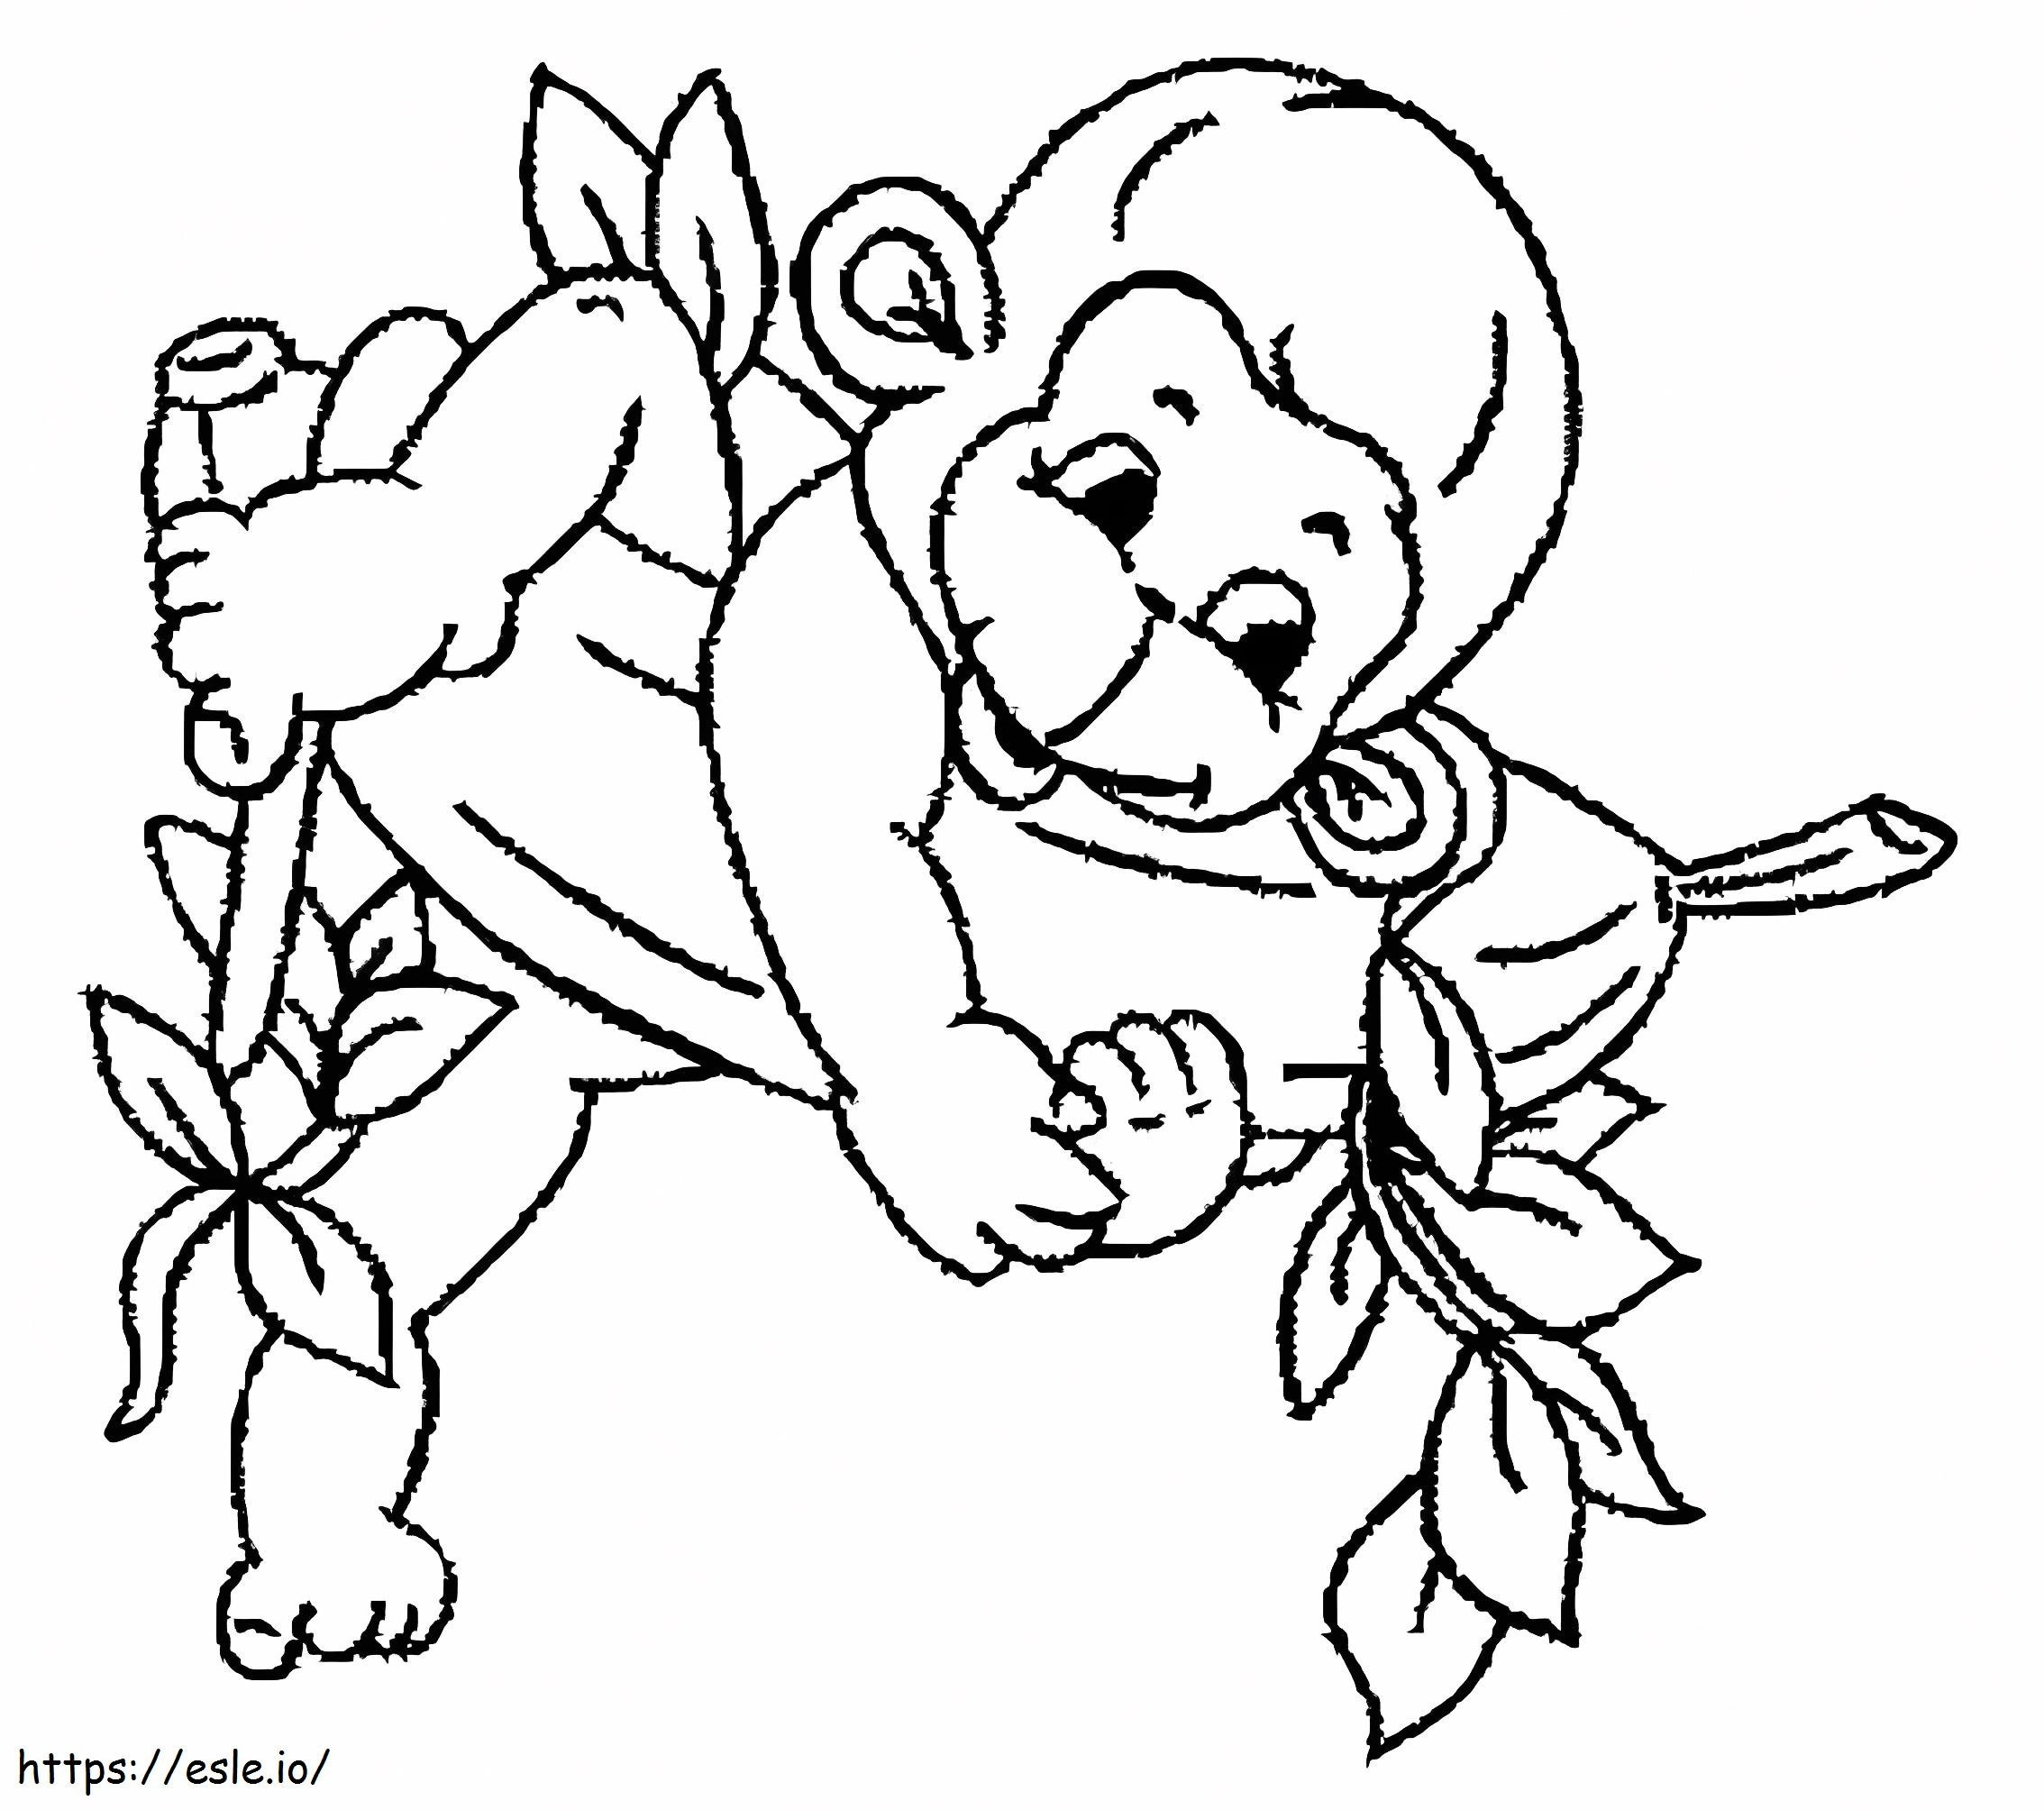 Small Monkey coloring page